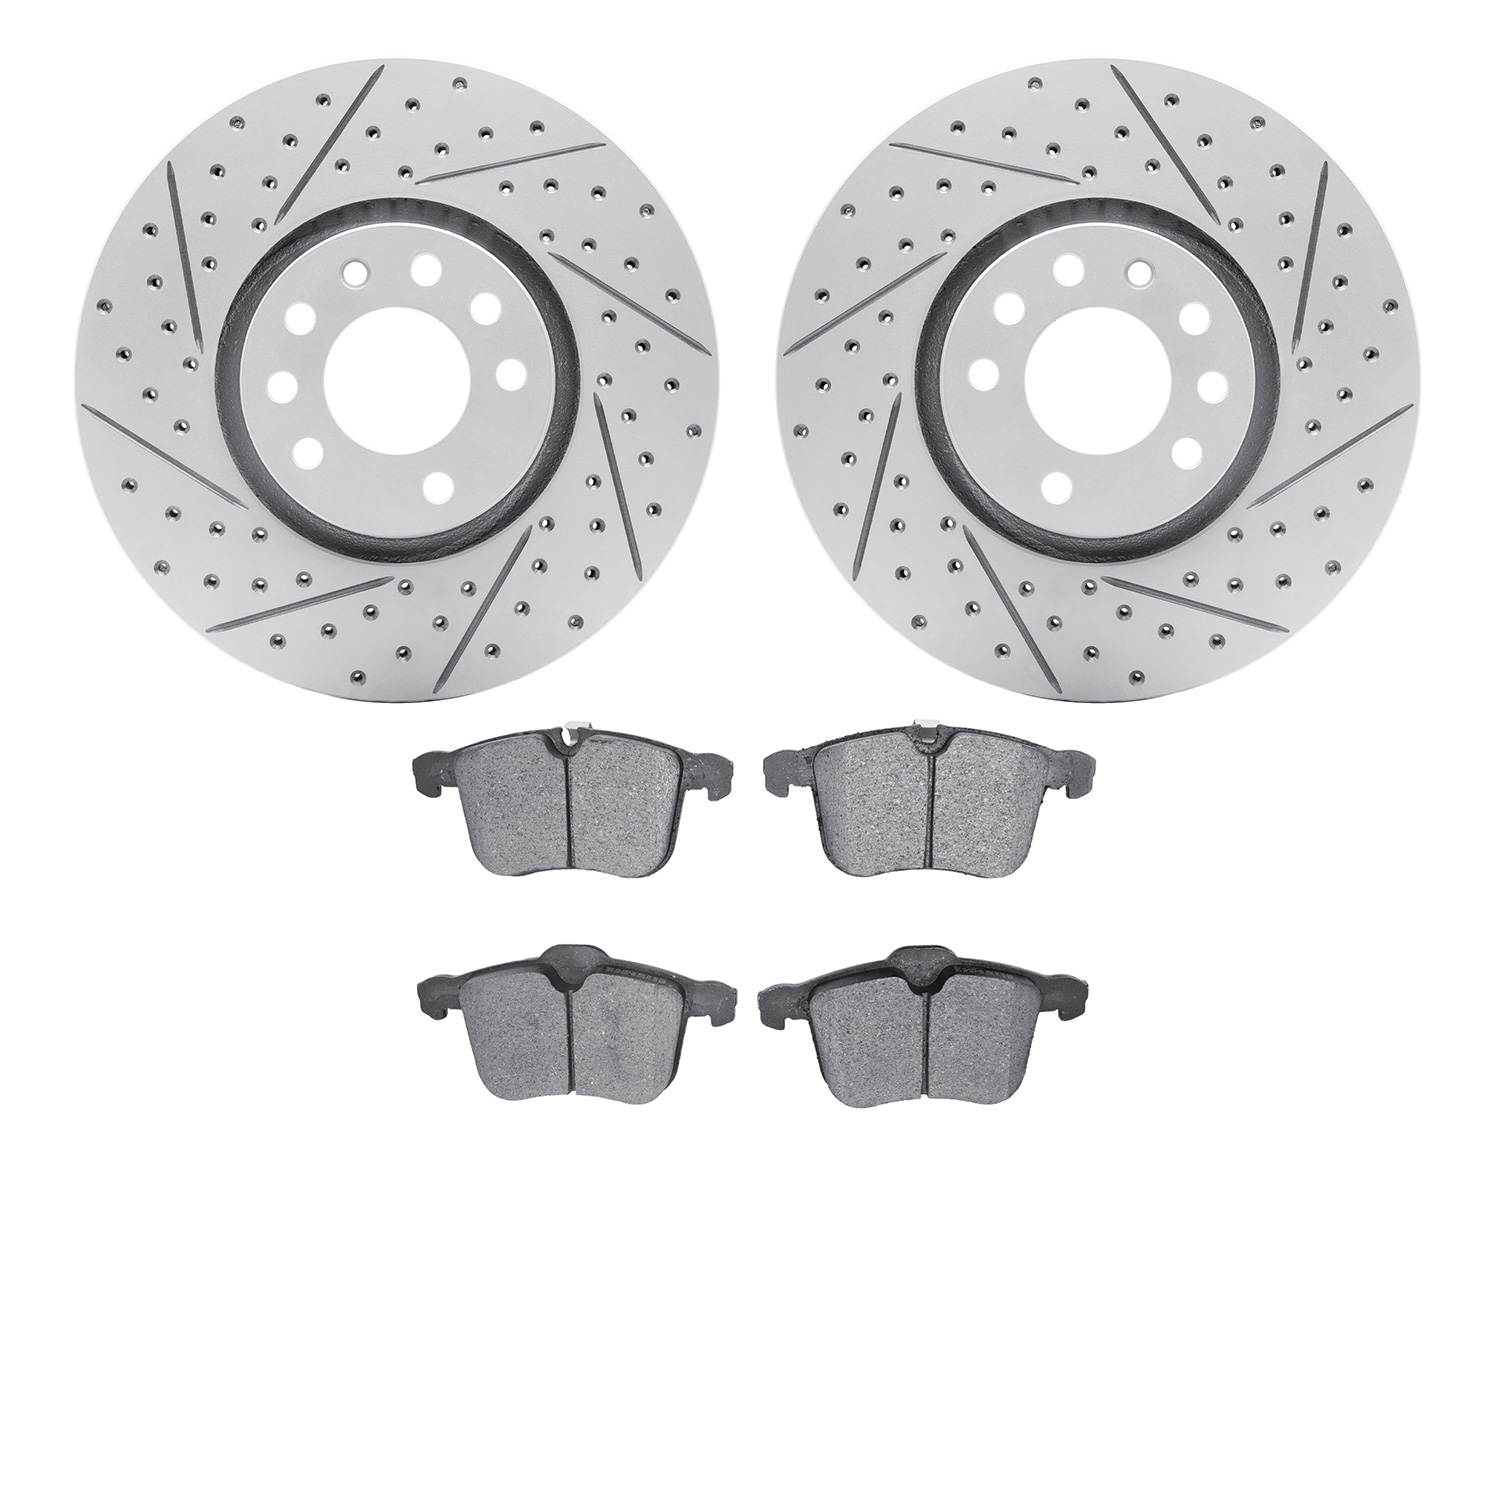 2502-65016 Geoperformance Drilled/Slotted Rotors w/5000 Advanced Brake Pads Kit, 2003-2011 GM, Position: Front